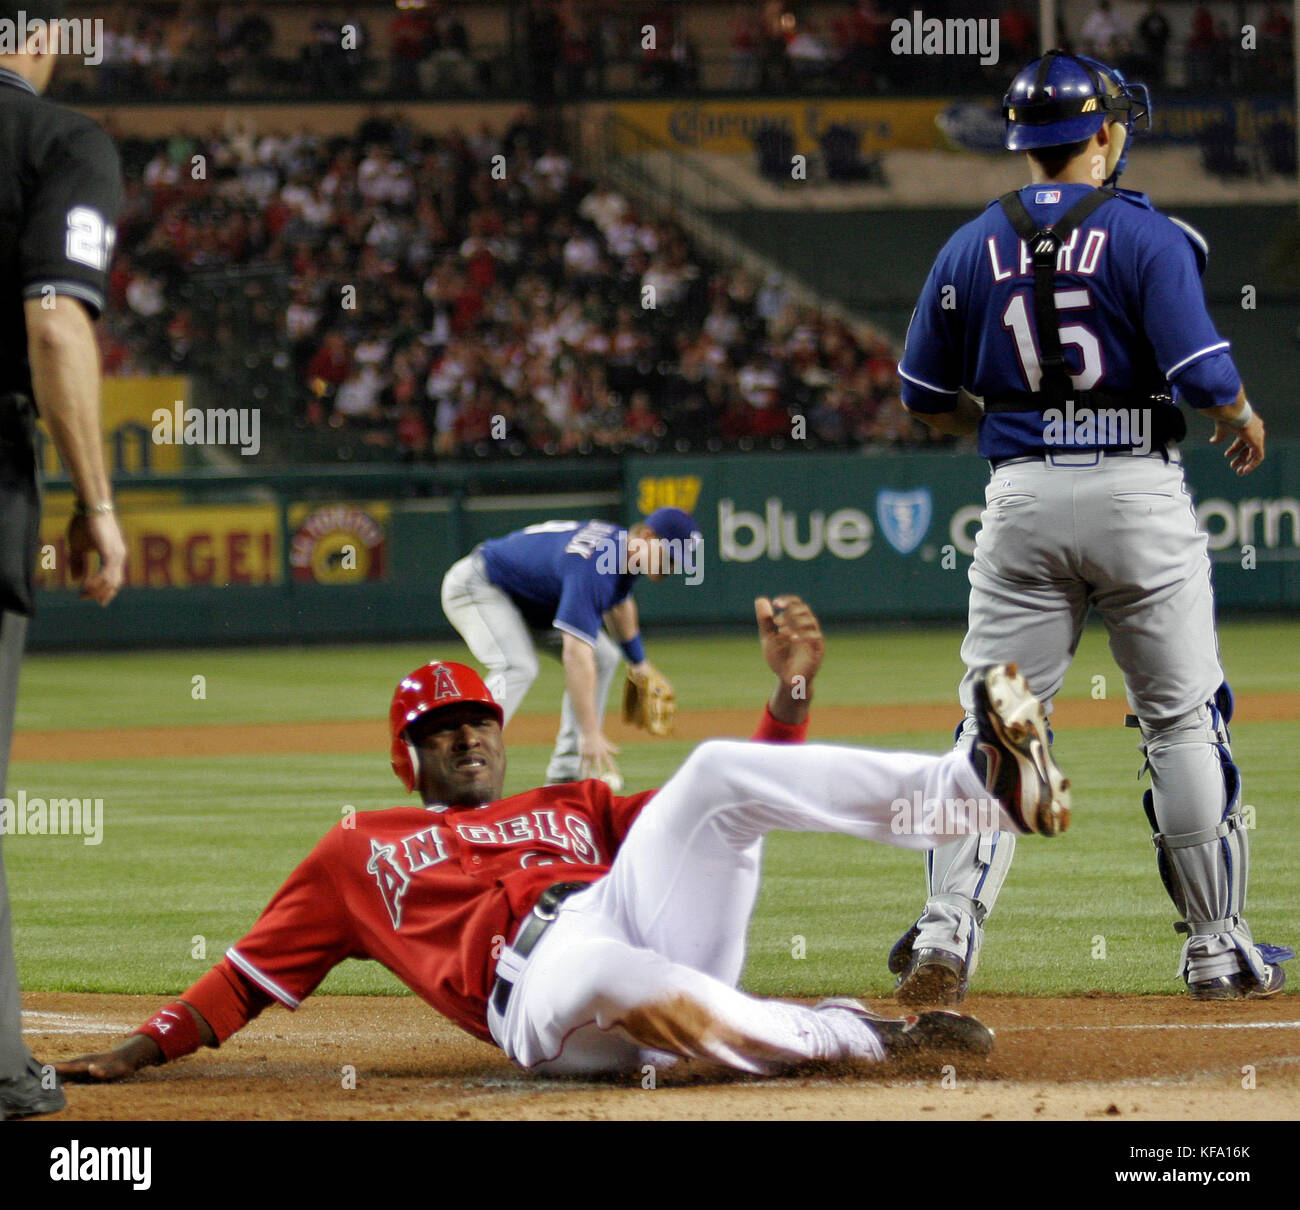 Los Angeles Angels' Gary Matthews Jr., left, slides into home plate scoring on a single by Vladimir Guerrero as Texas Rangers catcher Gerald Laird, right, awaits a throw during the first inning of a baseball game in Anaheim, Calif., on Tuesday, April 3, 2007. Photo by Francis Specker Stock Photo